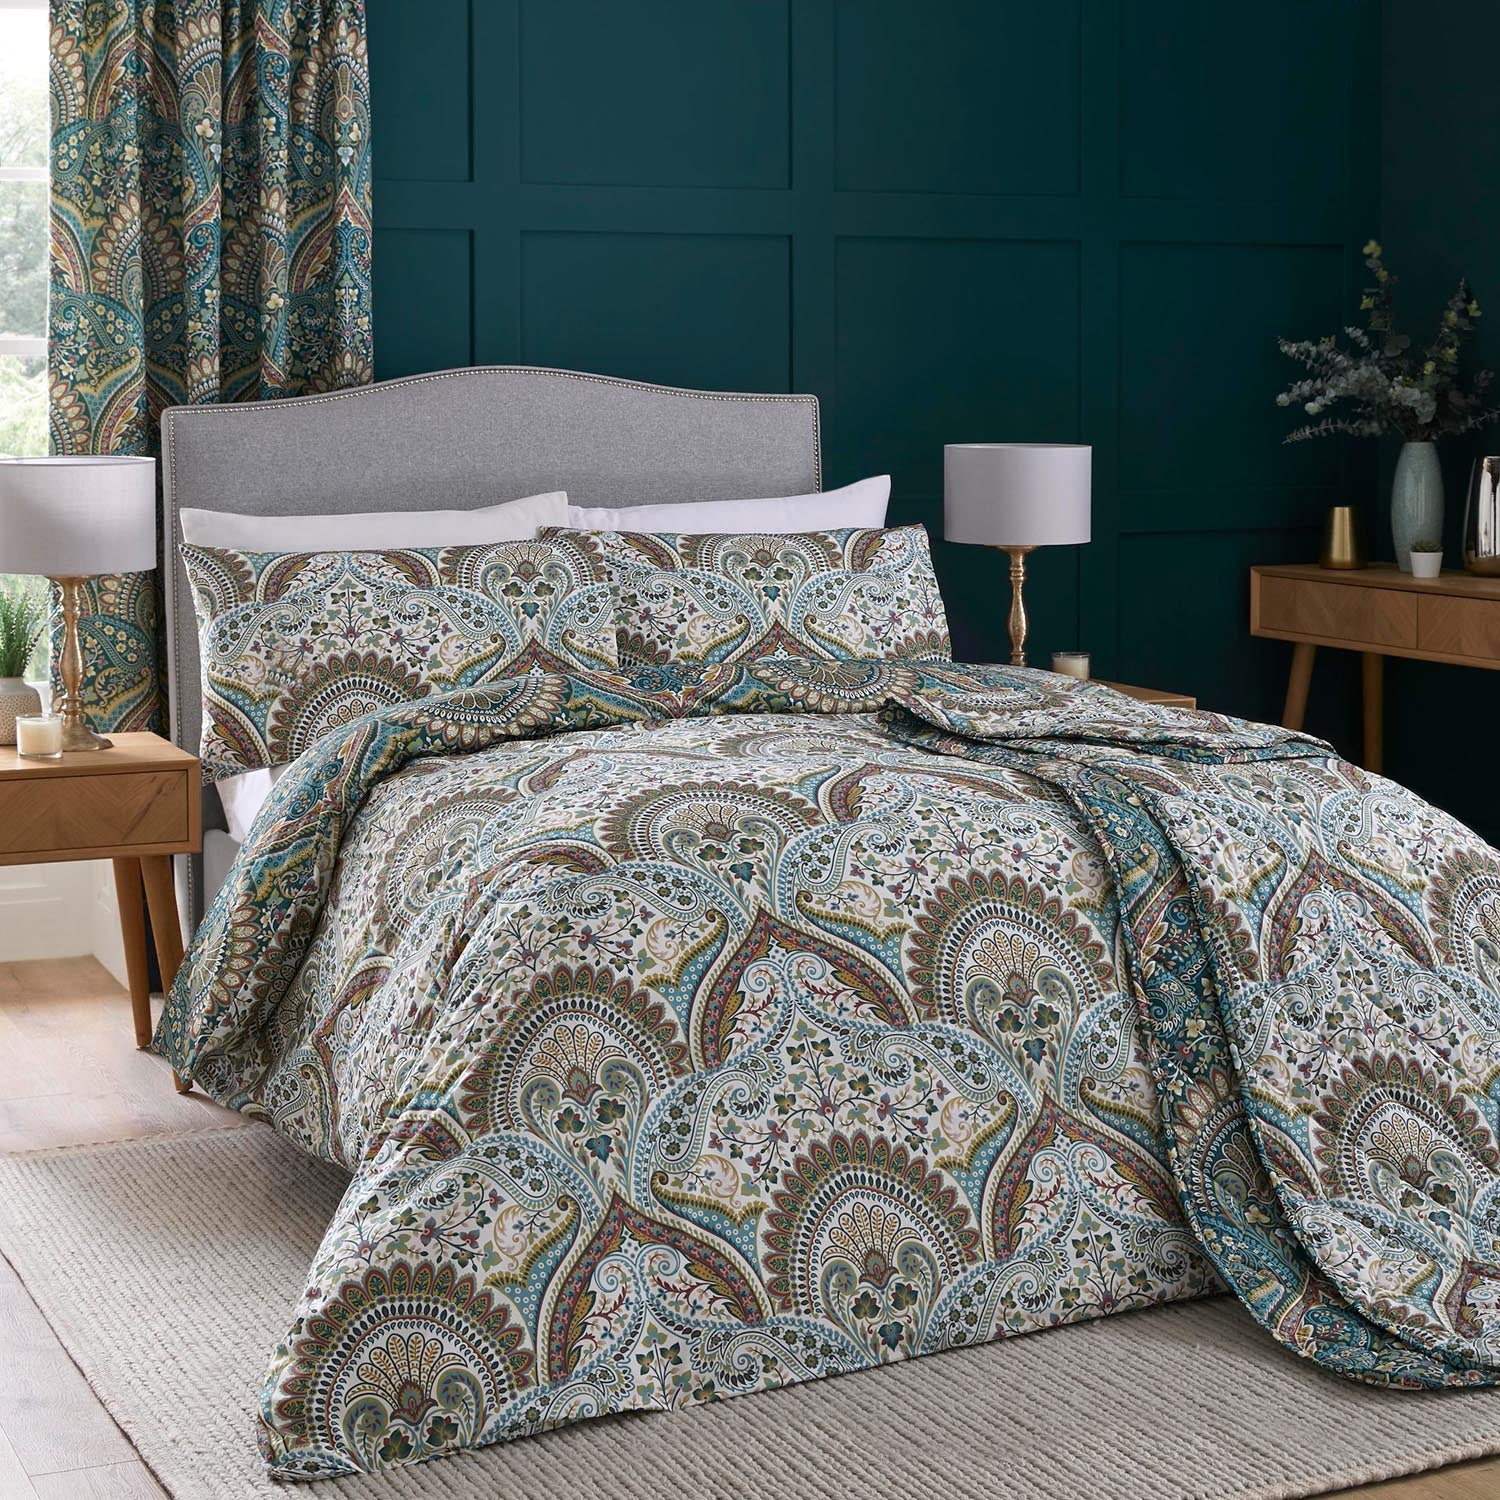 The Home Collection Palace Paisley Duvet Cover Set - Teal 7 Shaws Department Stores